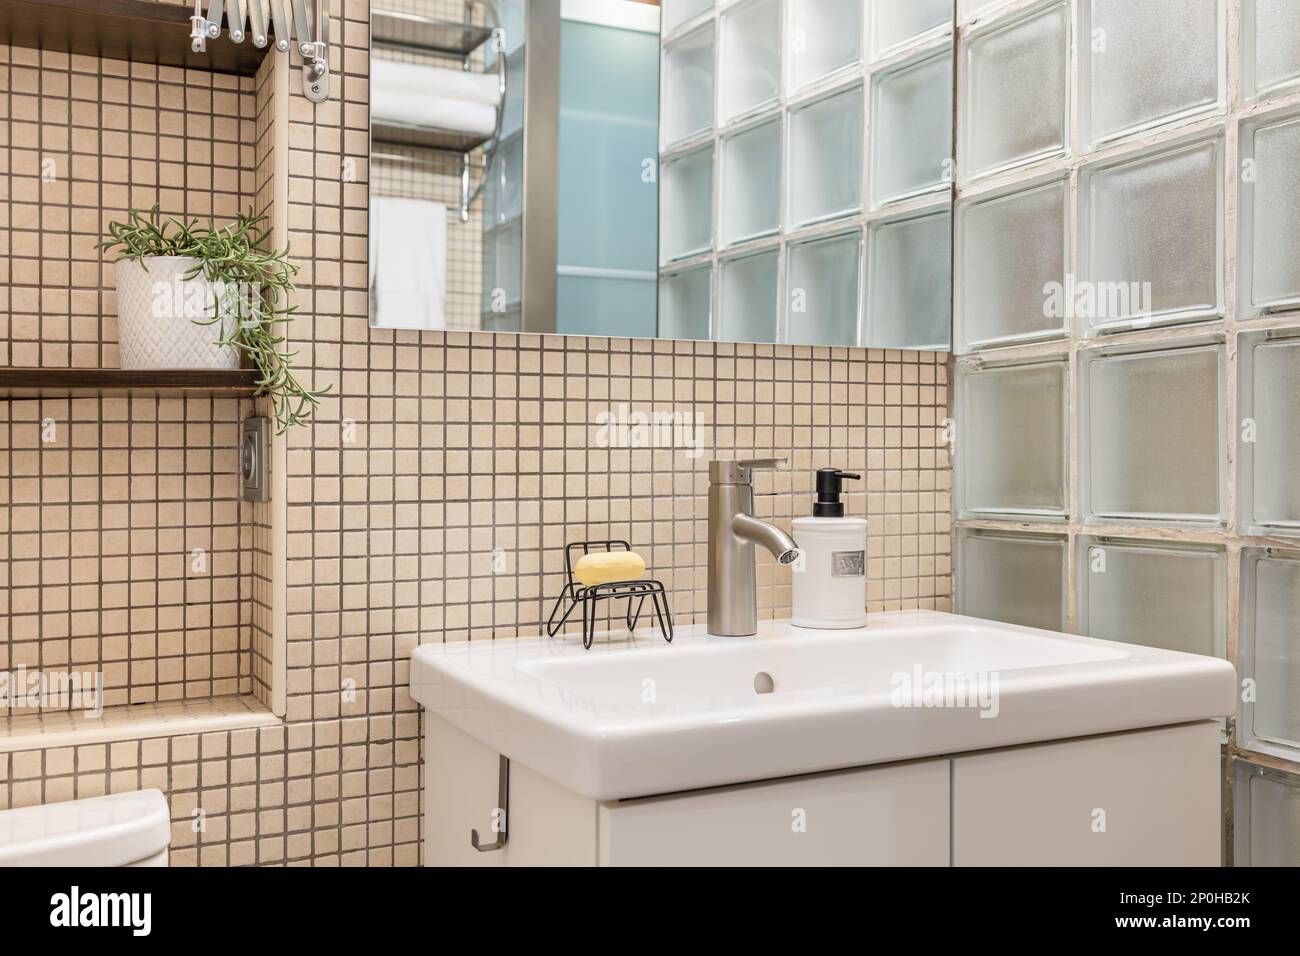 https://c8.alamy.com/comp/2P0HB2K/comfortable-white-sink-with-soap-dish-mirror-on-the-wall-and-shelves-on-beige-mosaic-tile-in-stylish-bathroom-with-glass-tiles-concept-of-stylish-2P0HB2K.jpg